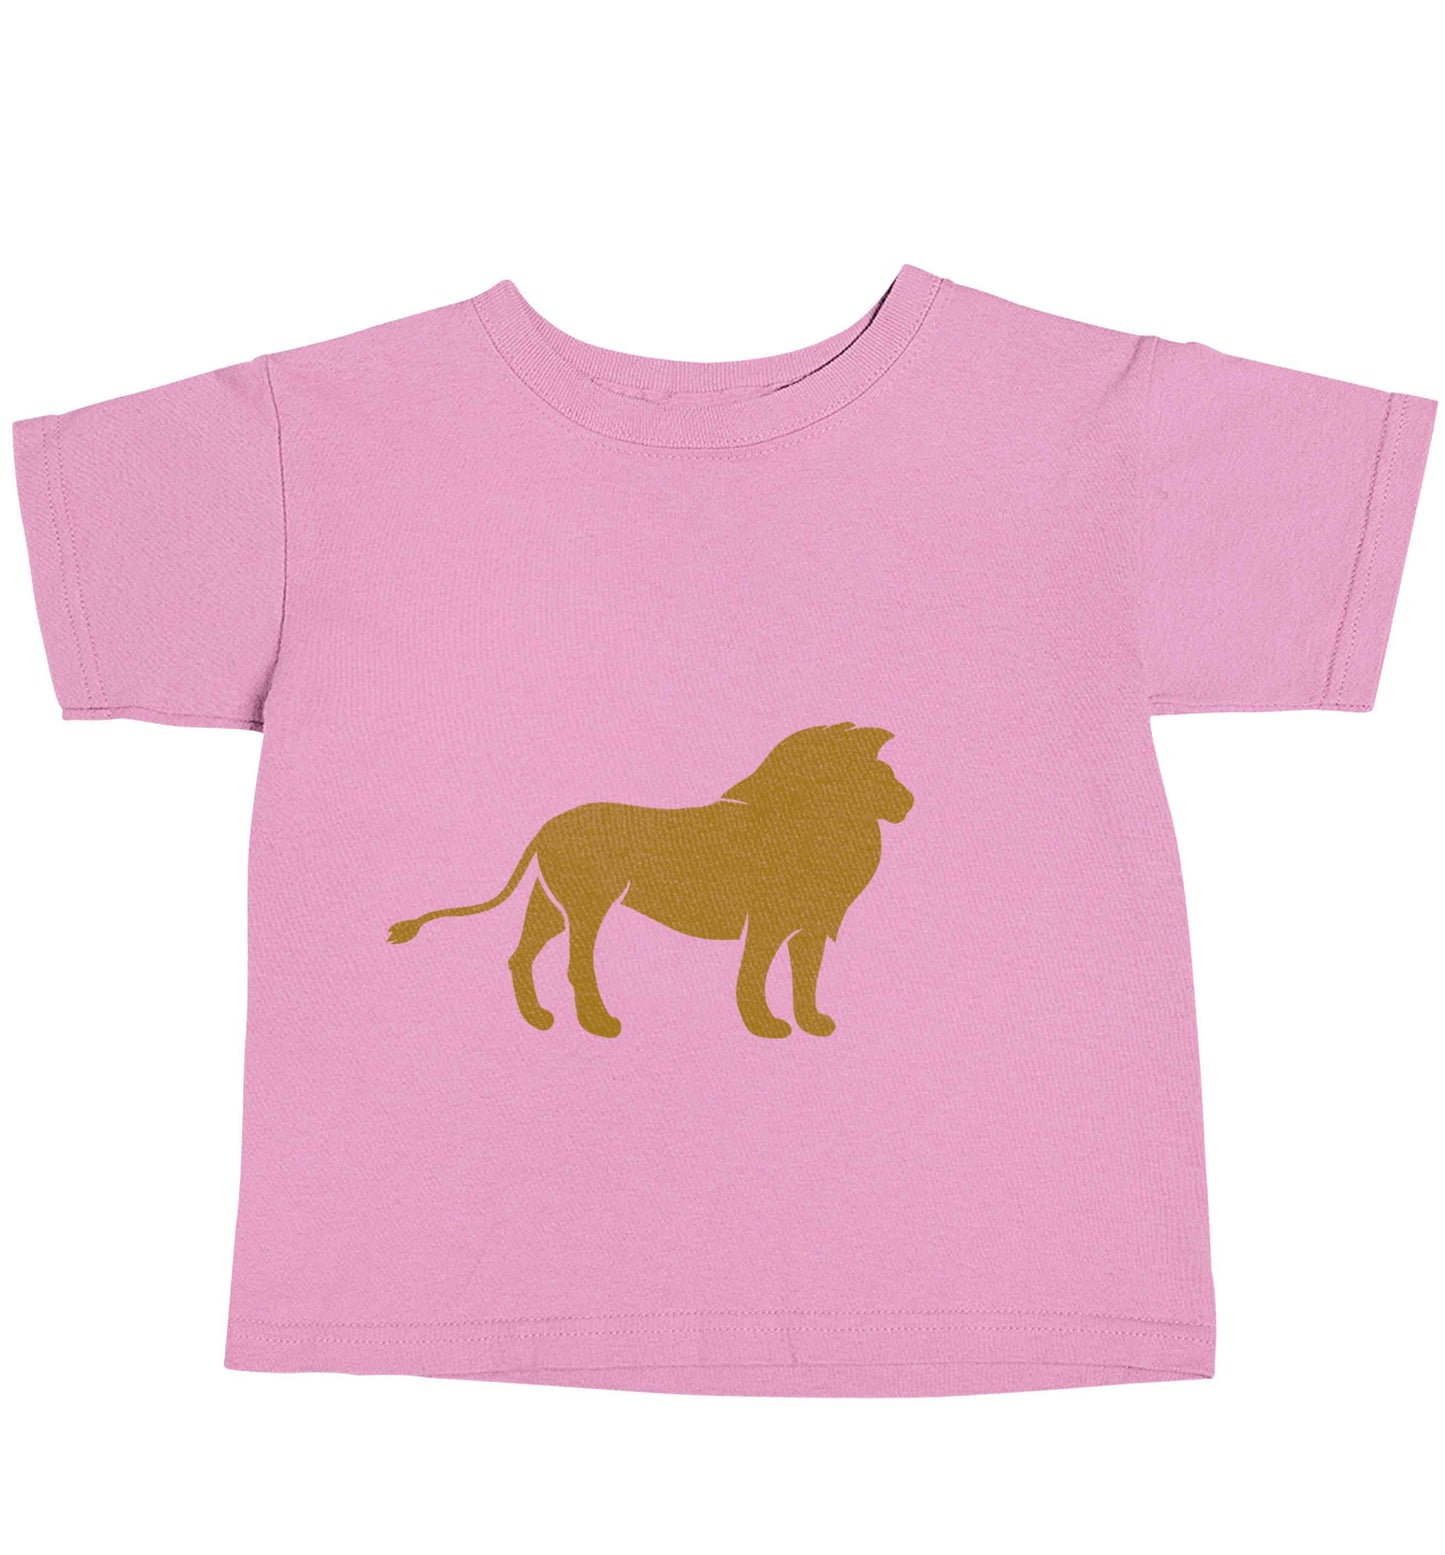 Gold lion light pink baby toddler Tshirt 2 Years